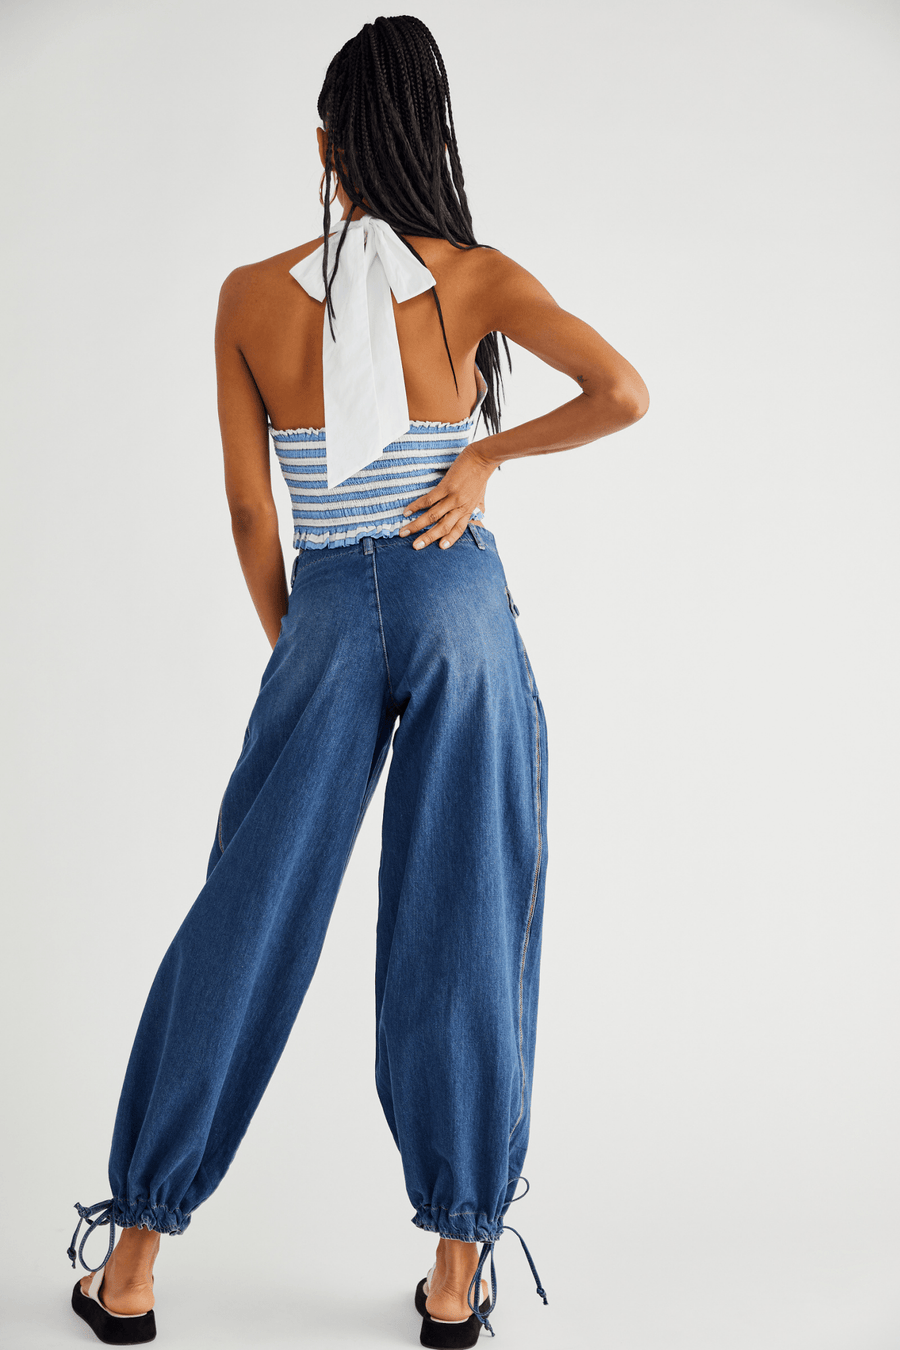 Lotus Jeans by Free People - Blue Sky Fashions & Lingerie